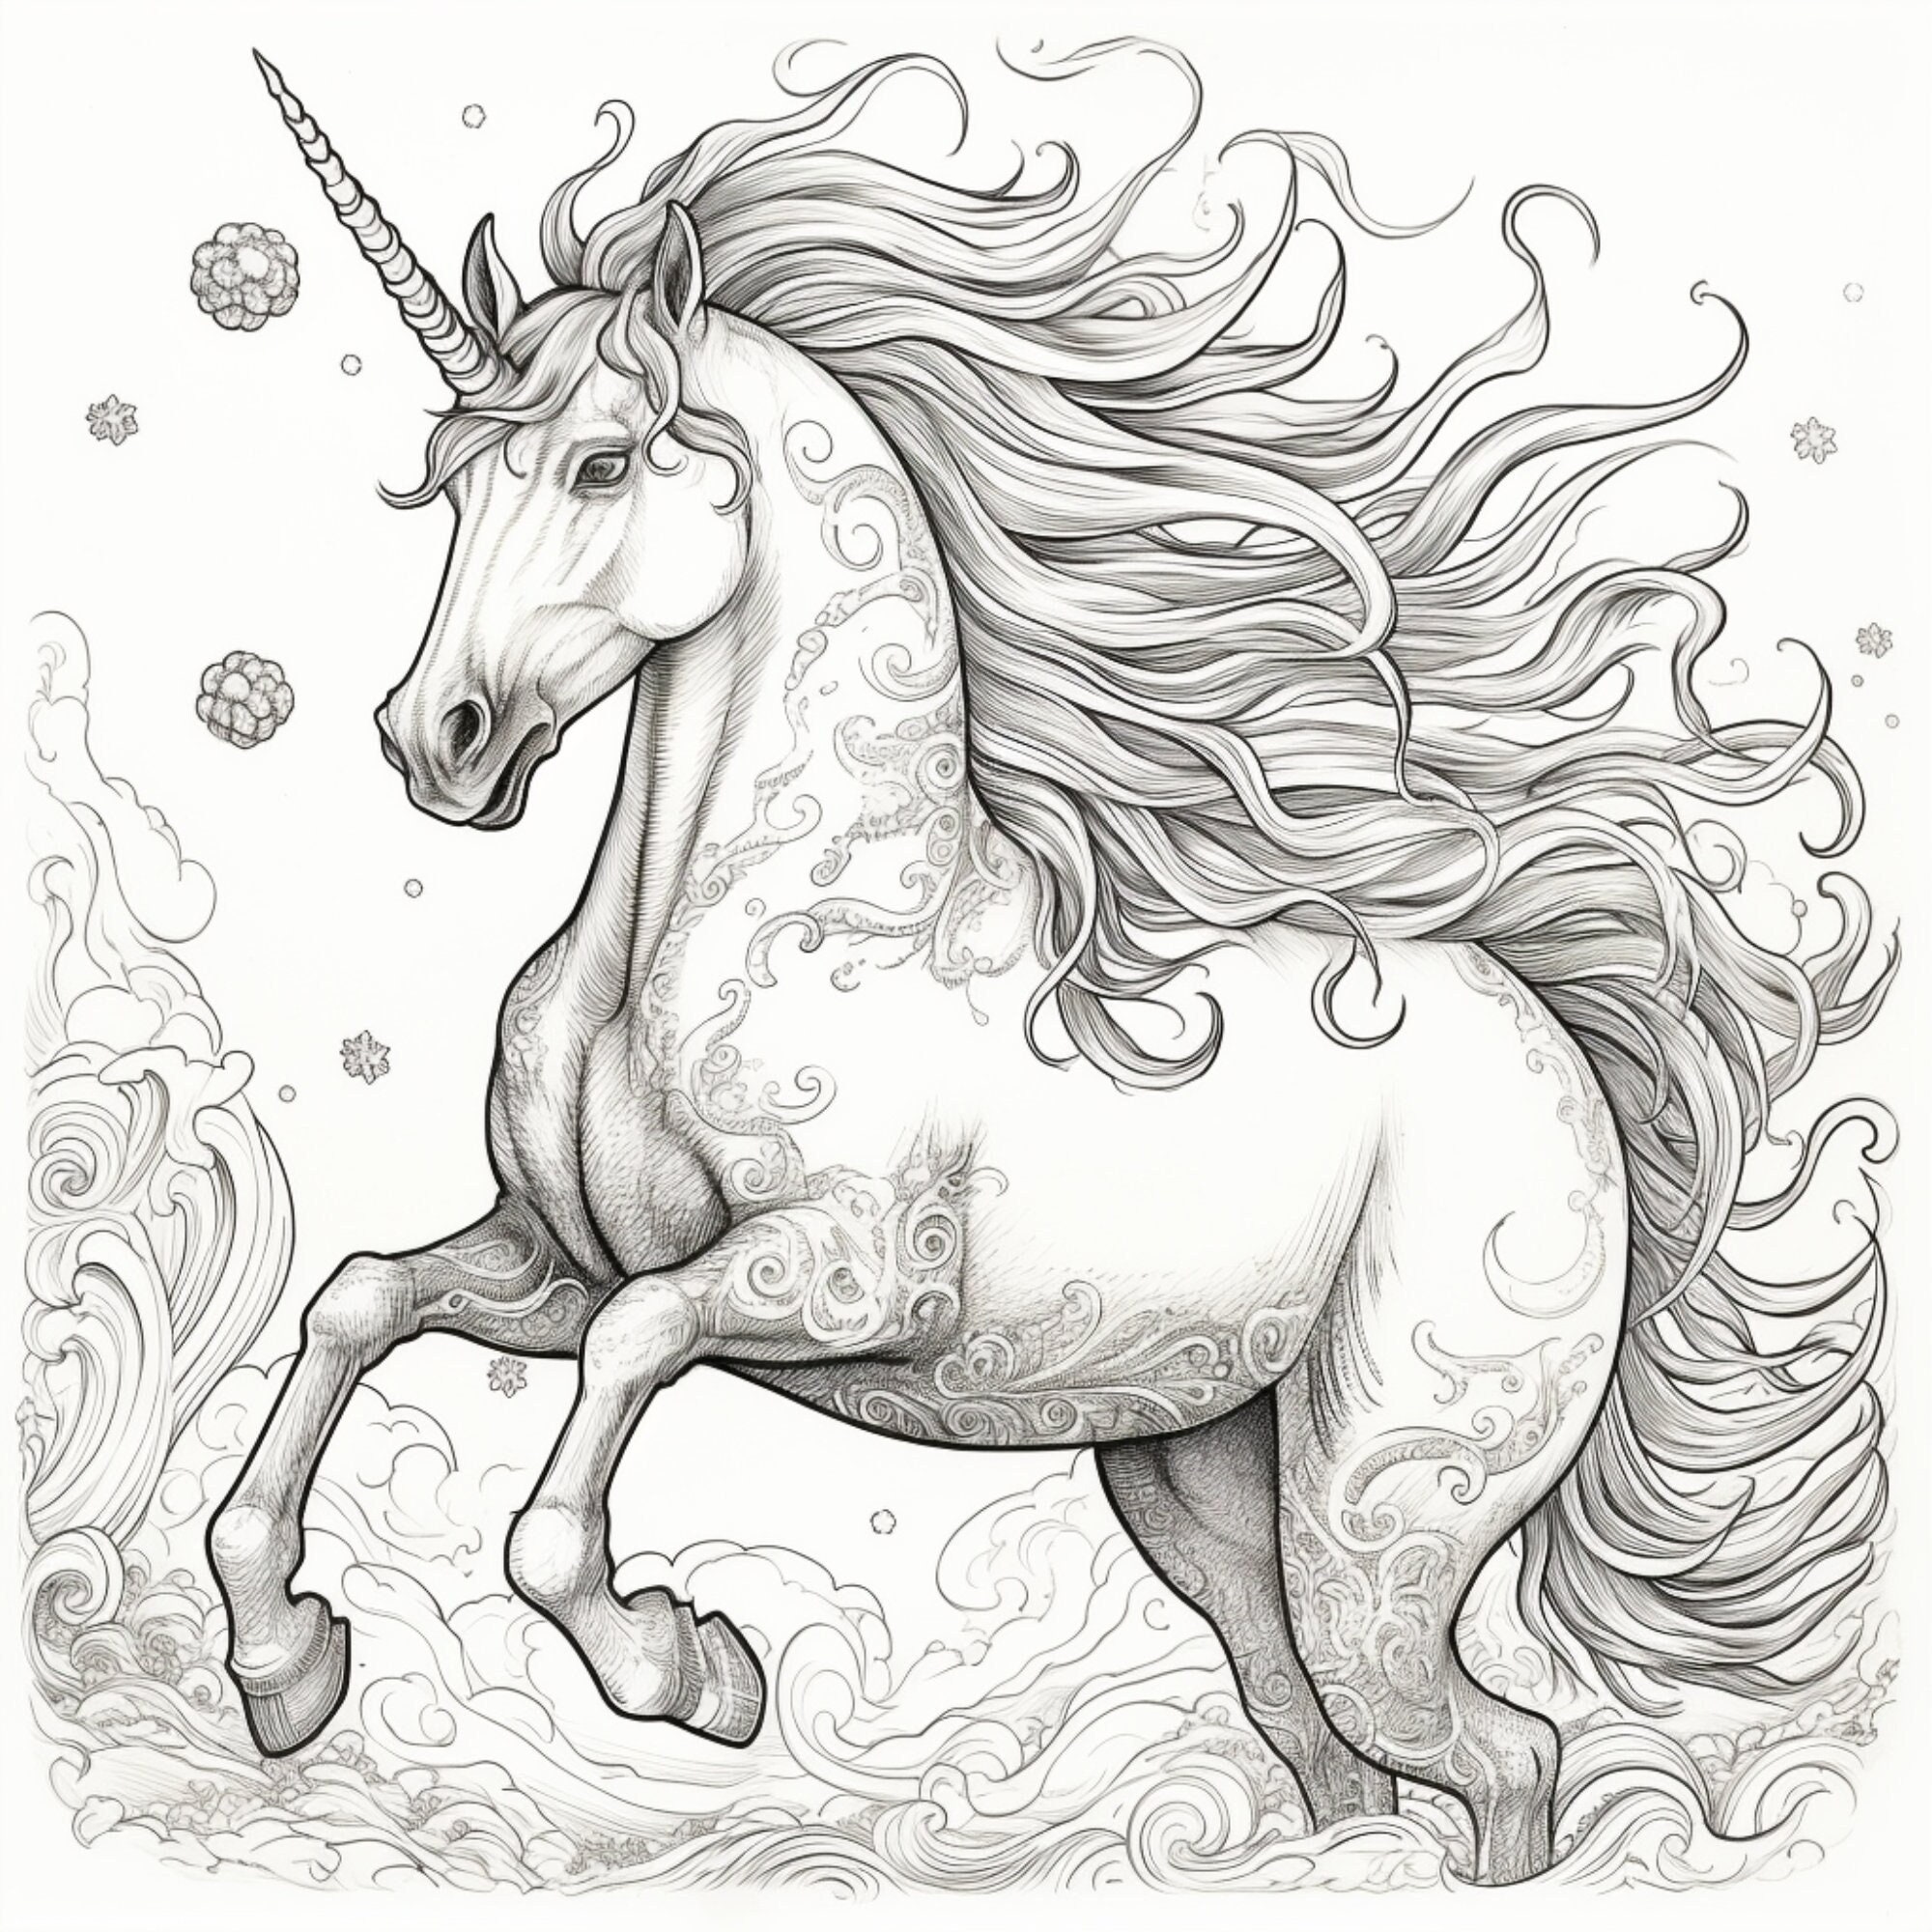 Unicorn Coloring Book: awesome drawings coloring books for kids